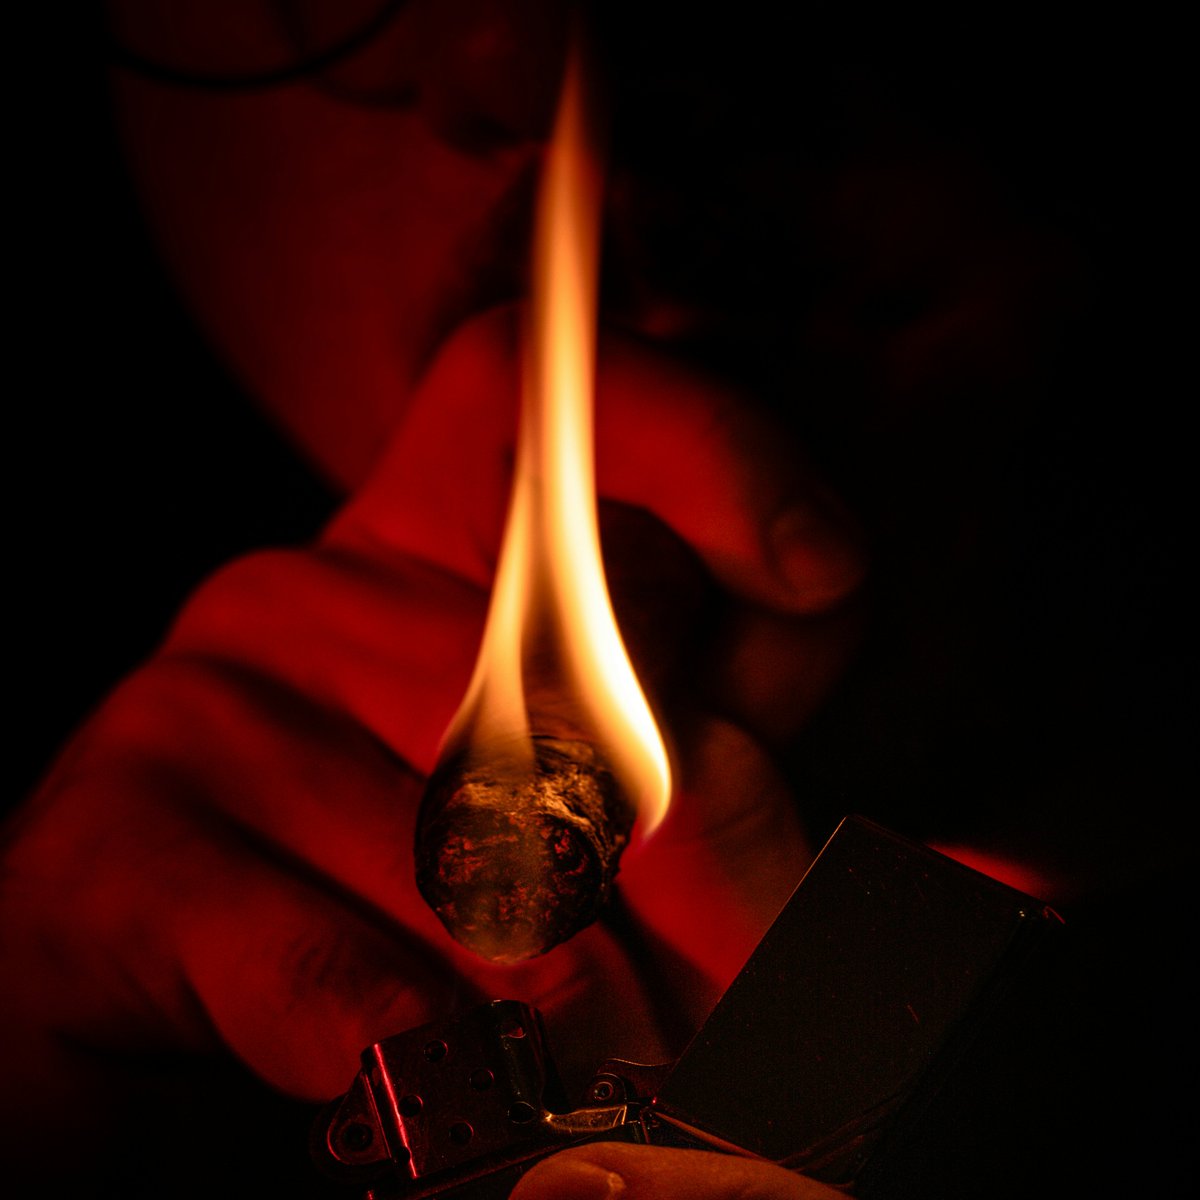 Light it up. Treat yourself to the ultimate indulgence. #IndulgeInLuxury #Cigar #TheDarlingHouse #relaxation